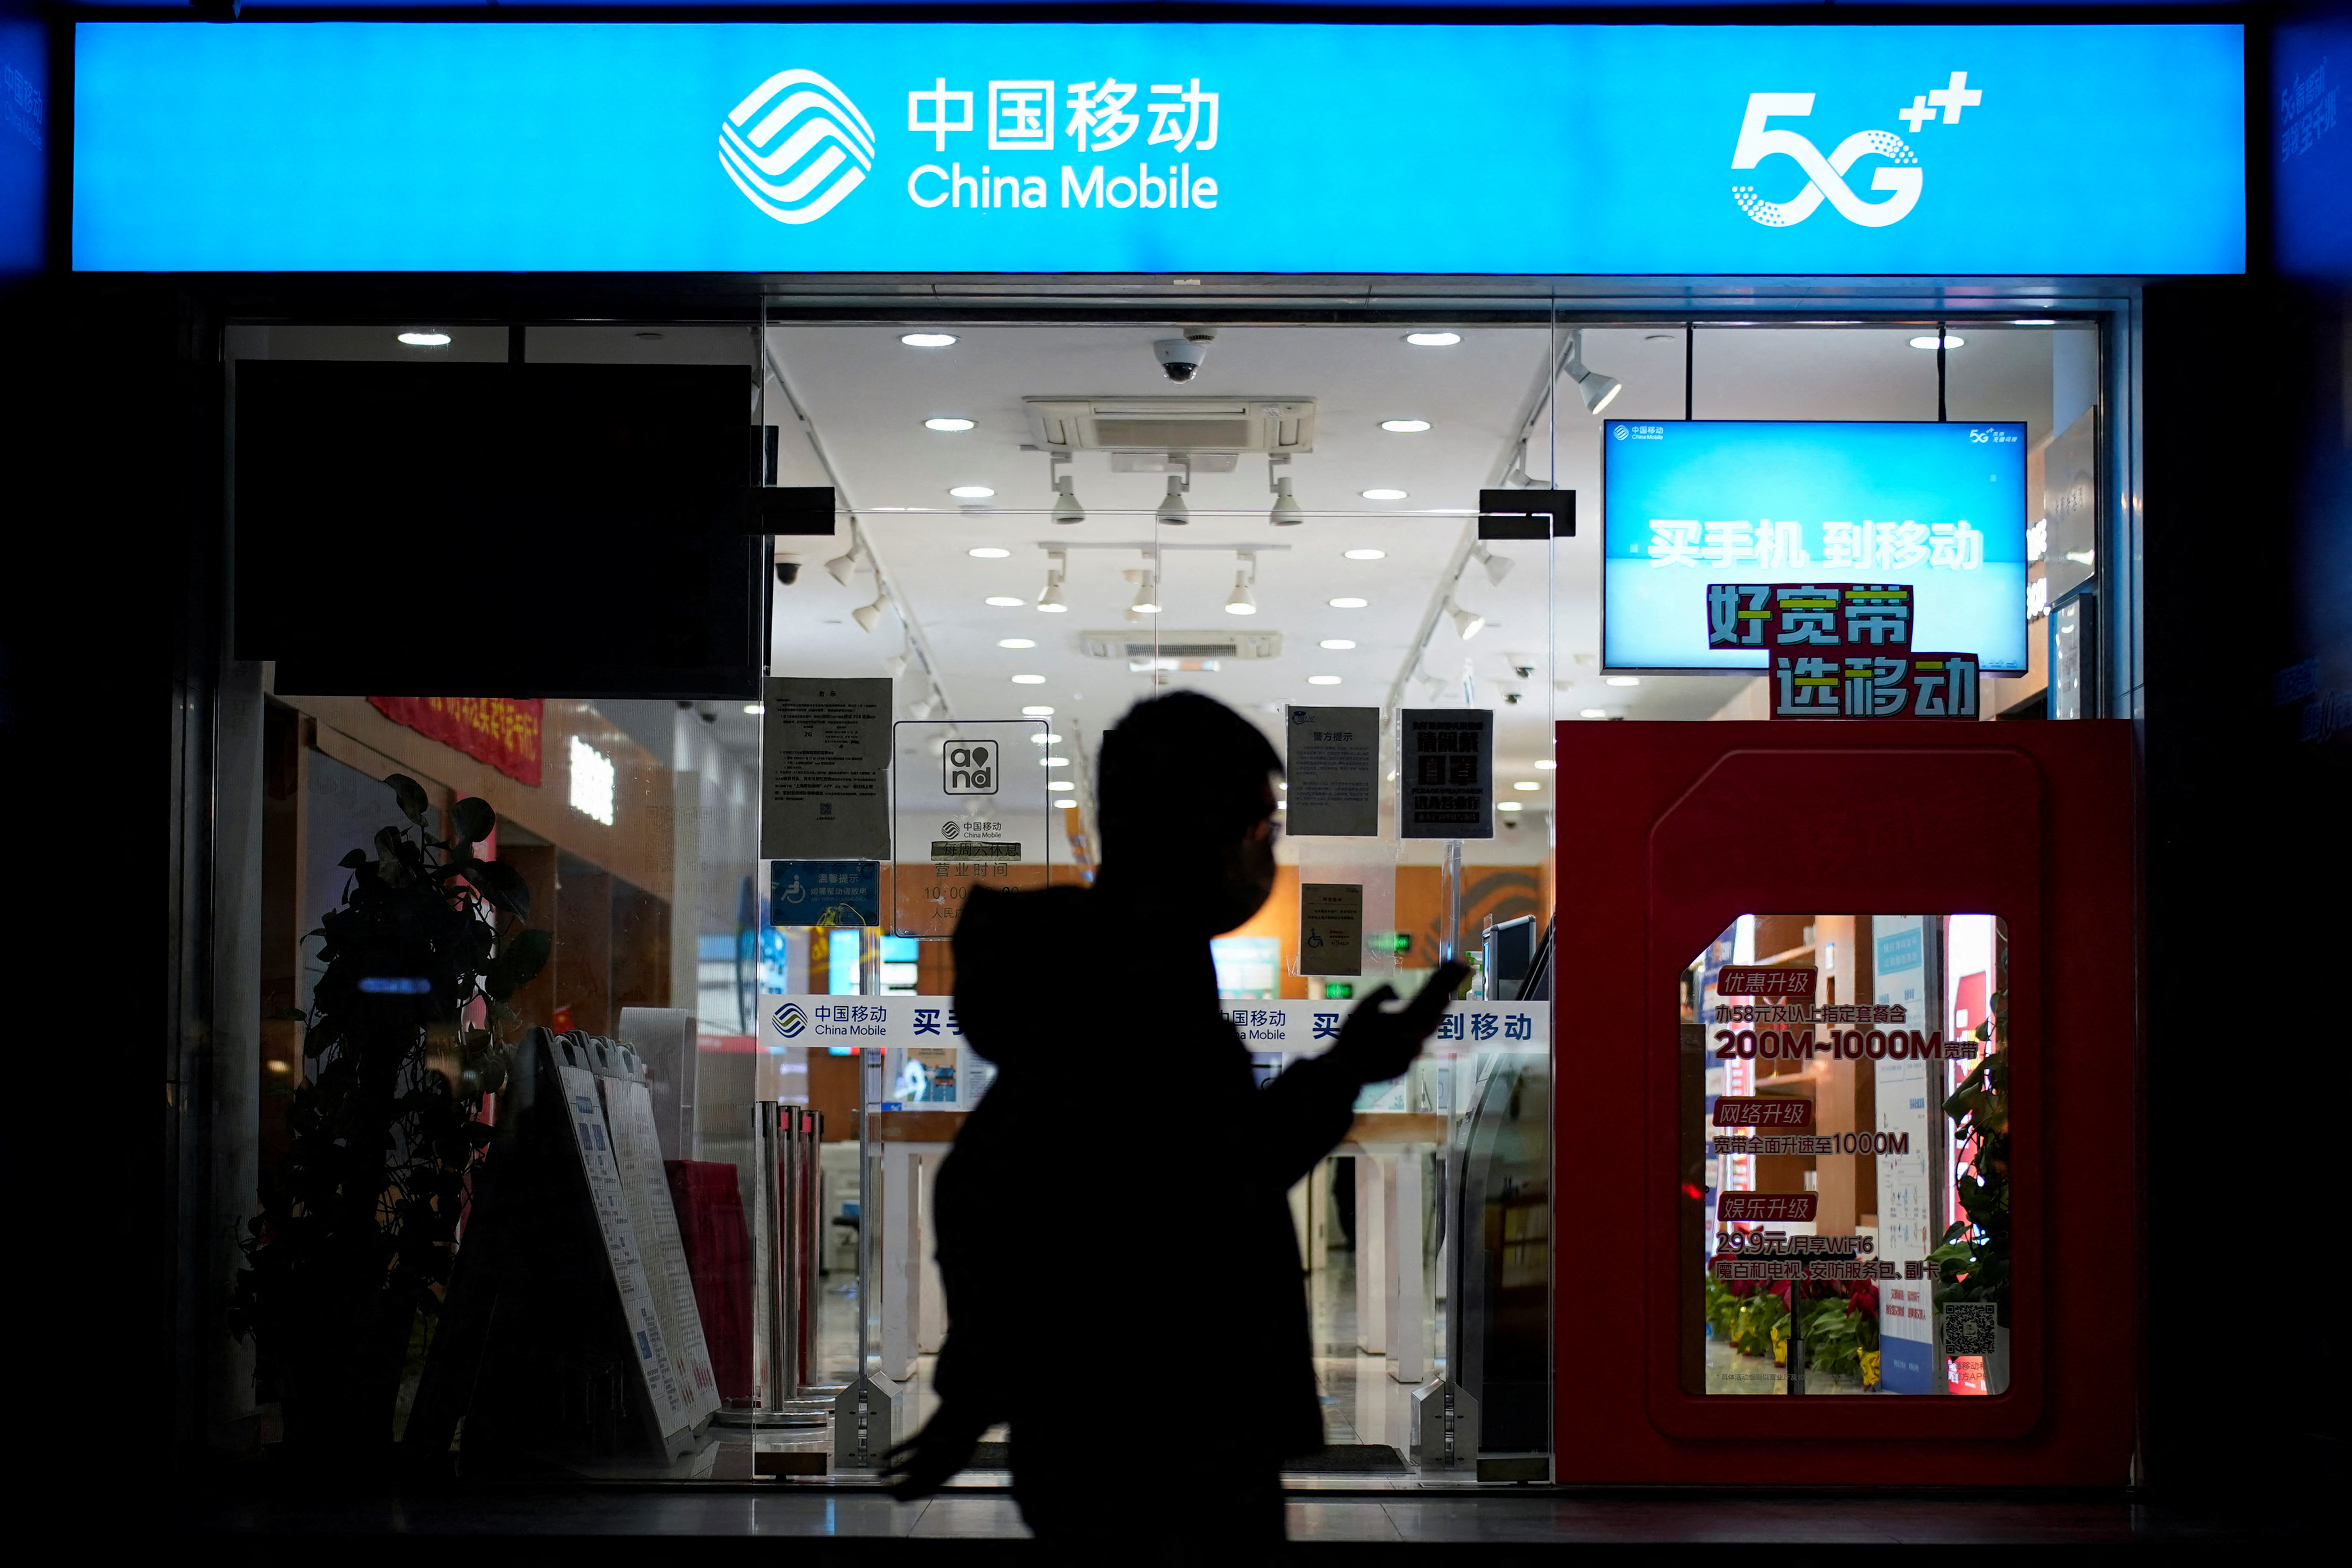 A sign of China Mobile is seen on a street in Shanghai